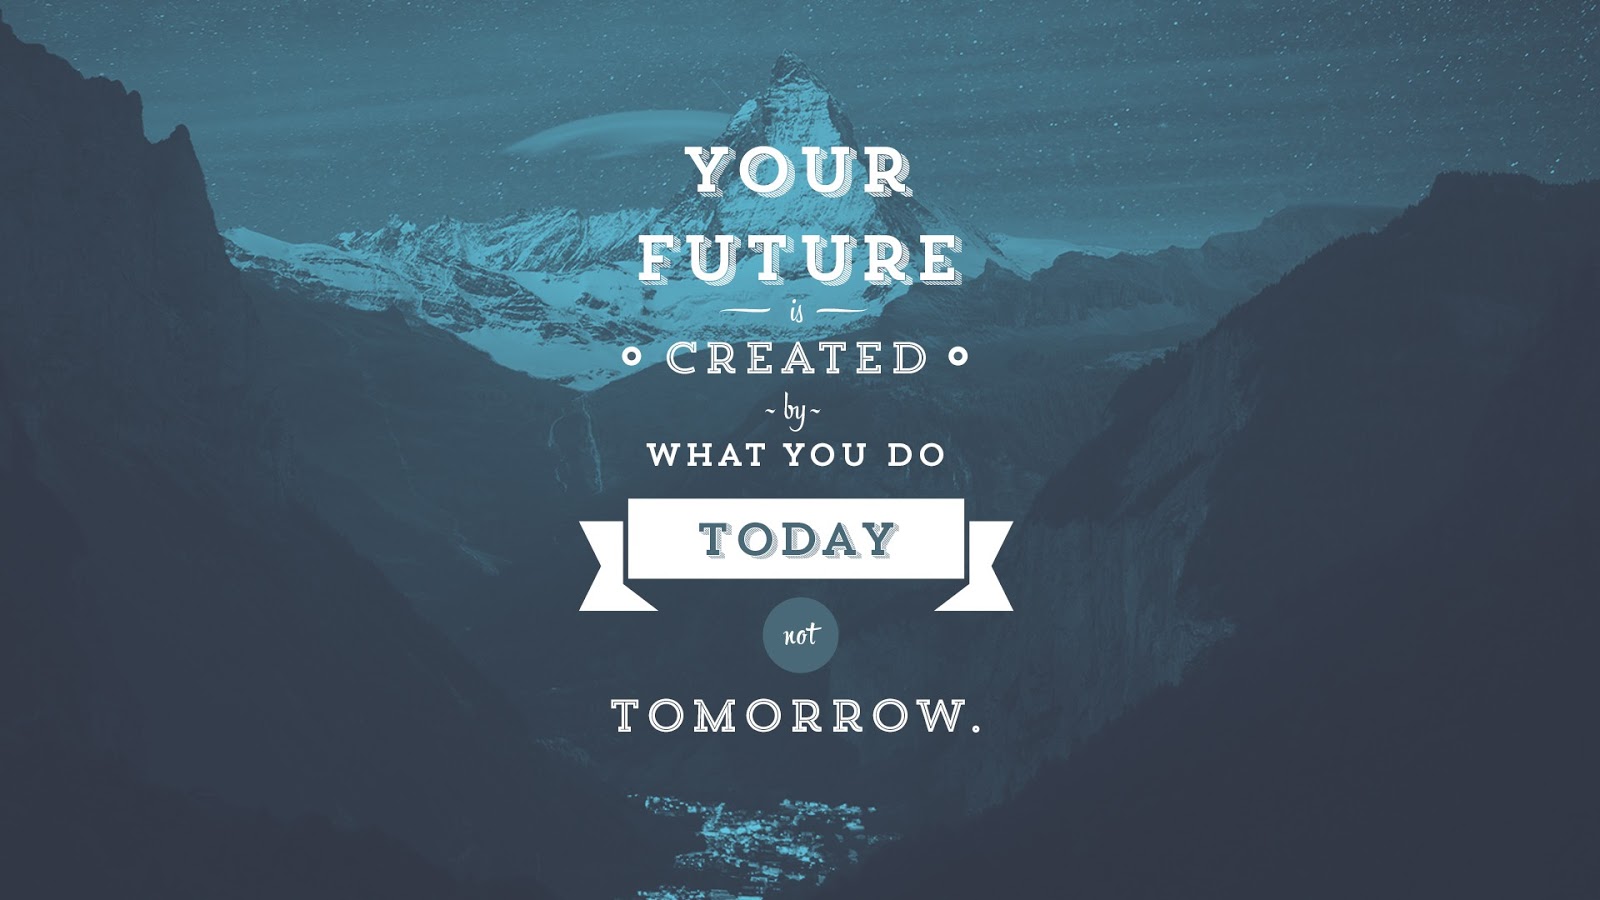 80 Motivational Wallpapers For Your Desktop To Boost Your Self Esteem